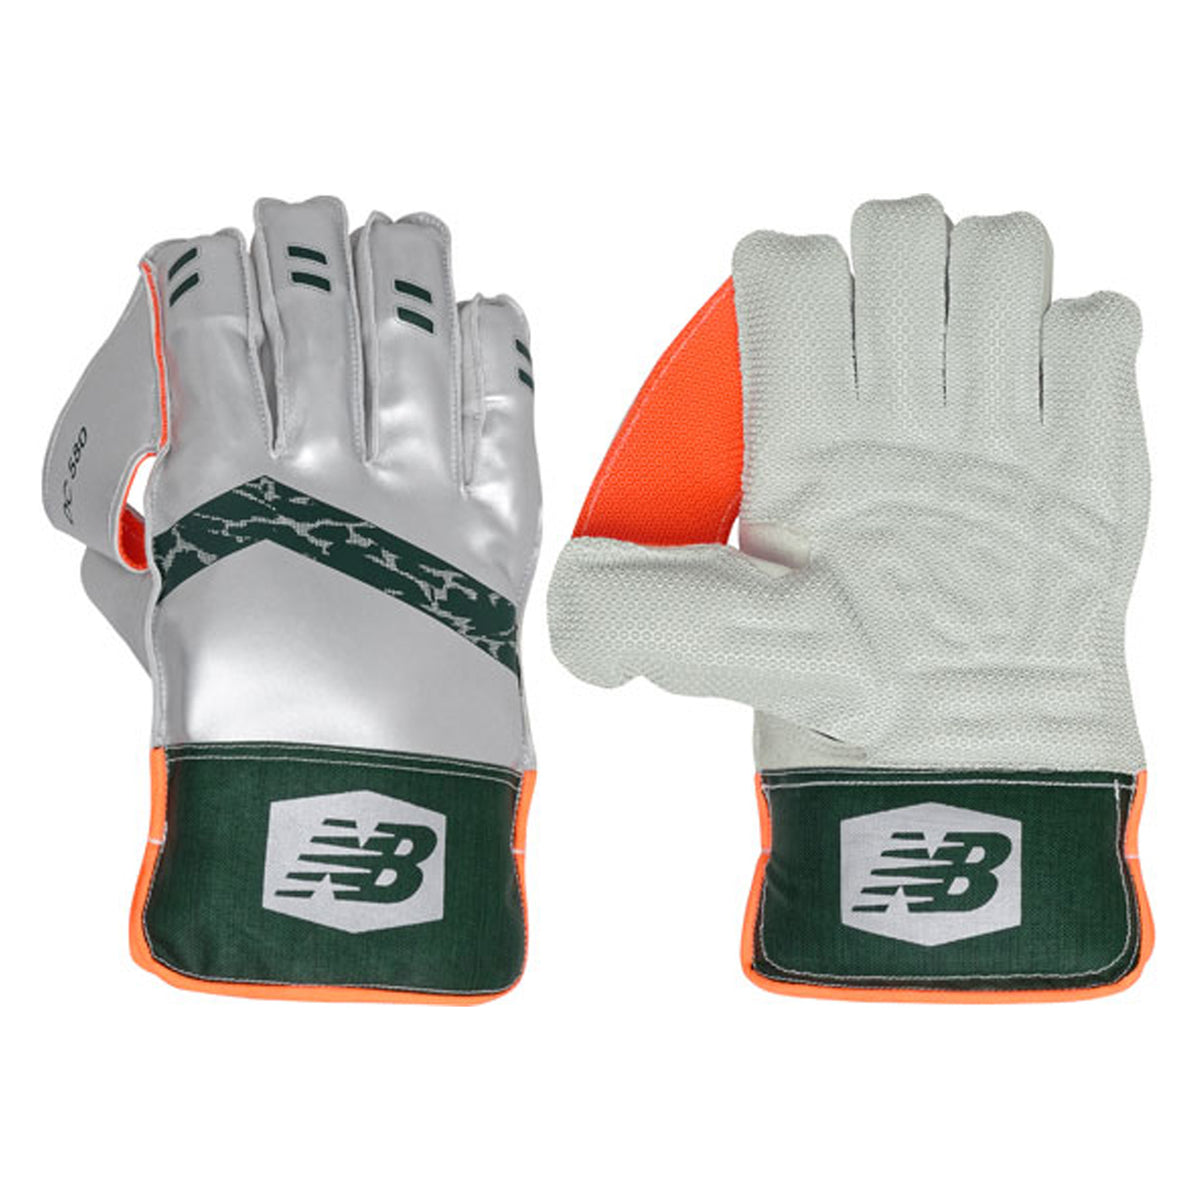 New Balance DC 580 Wicket Keeping Gloves